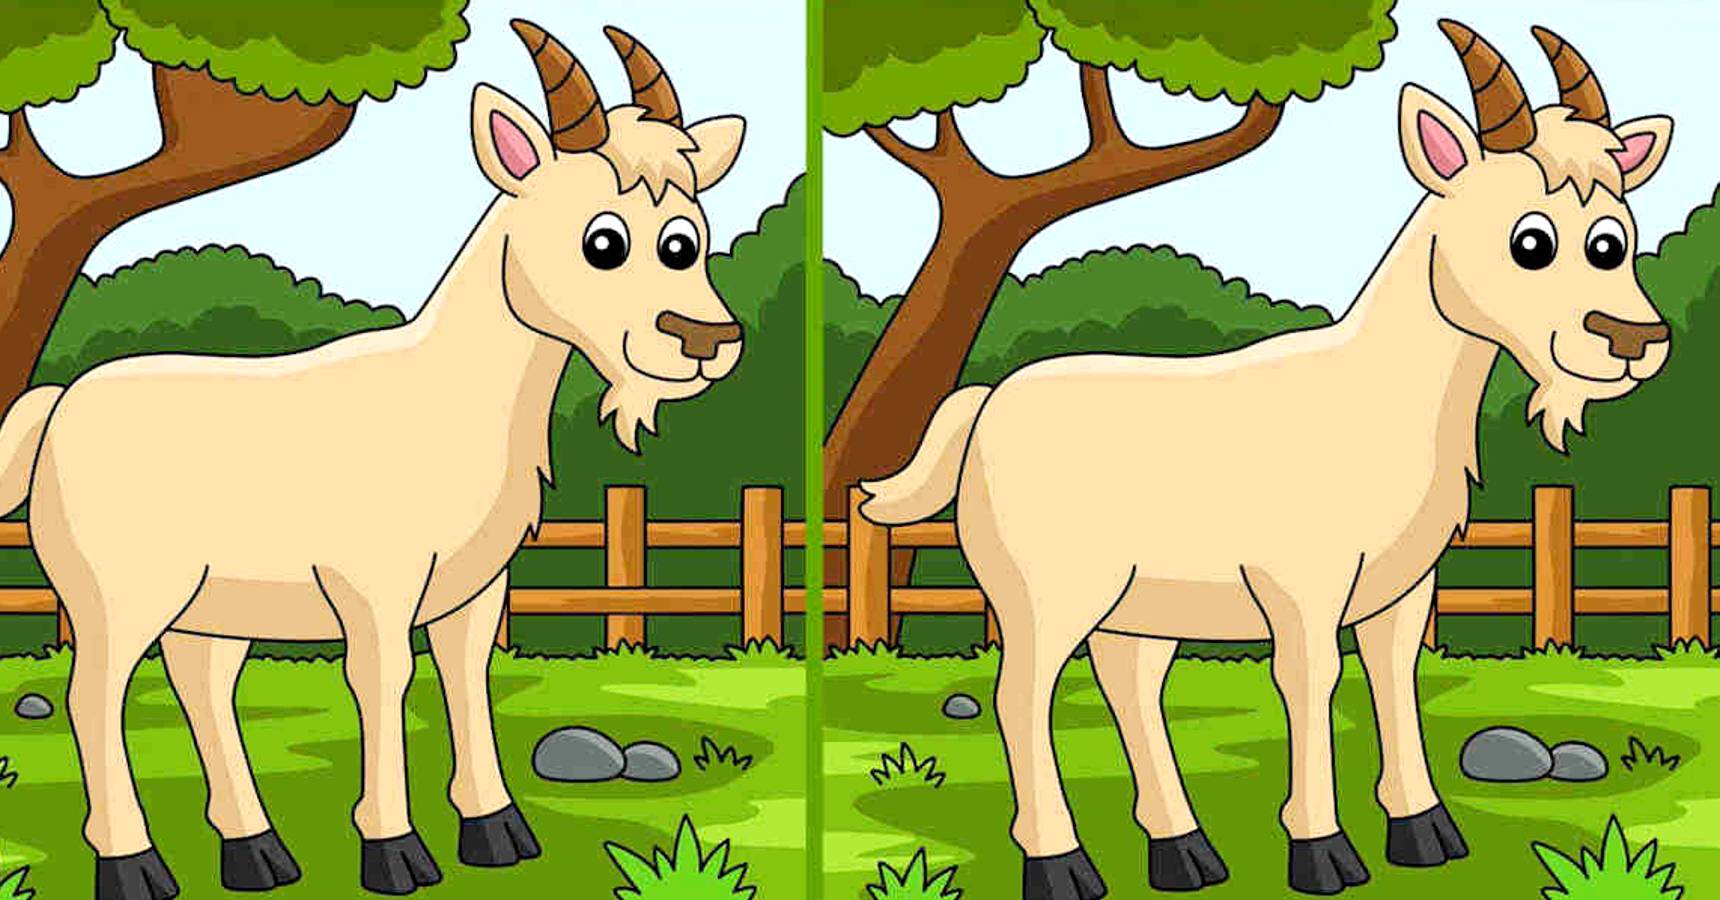 Brain teaser can you find 3 differences between the two goats within 13 seconds